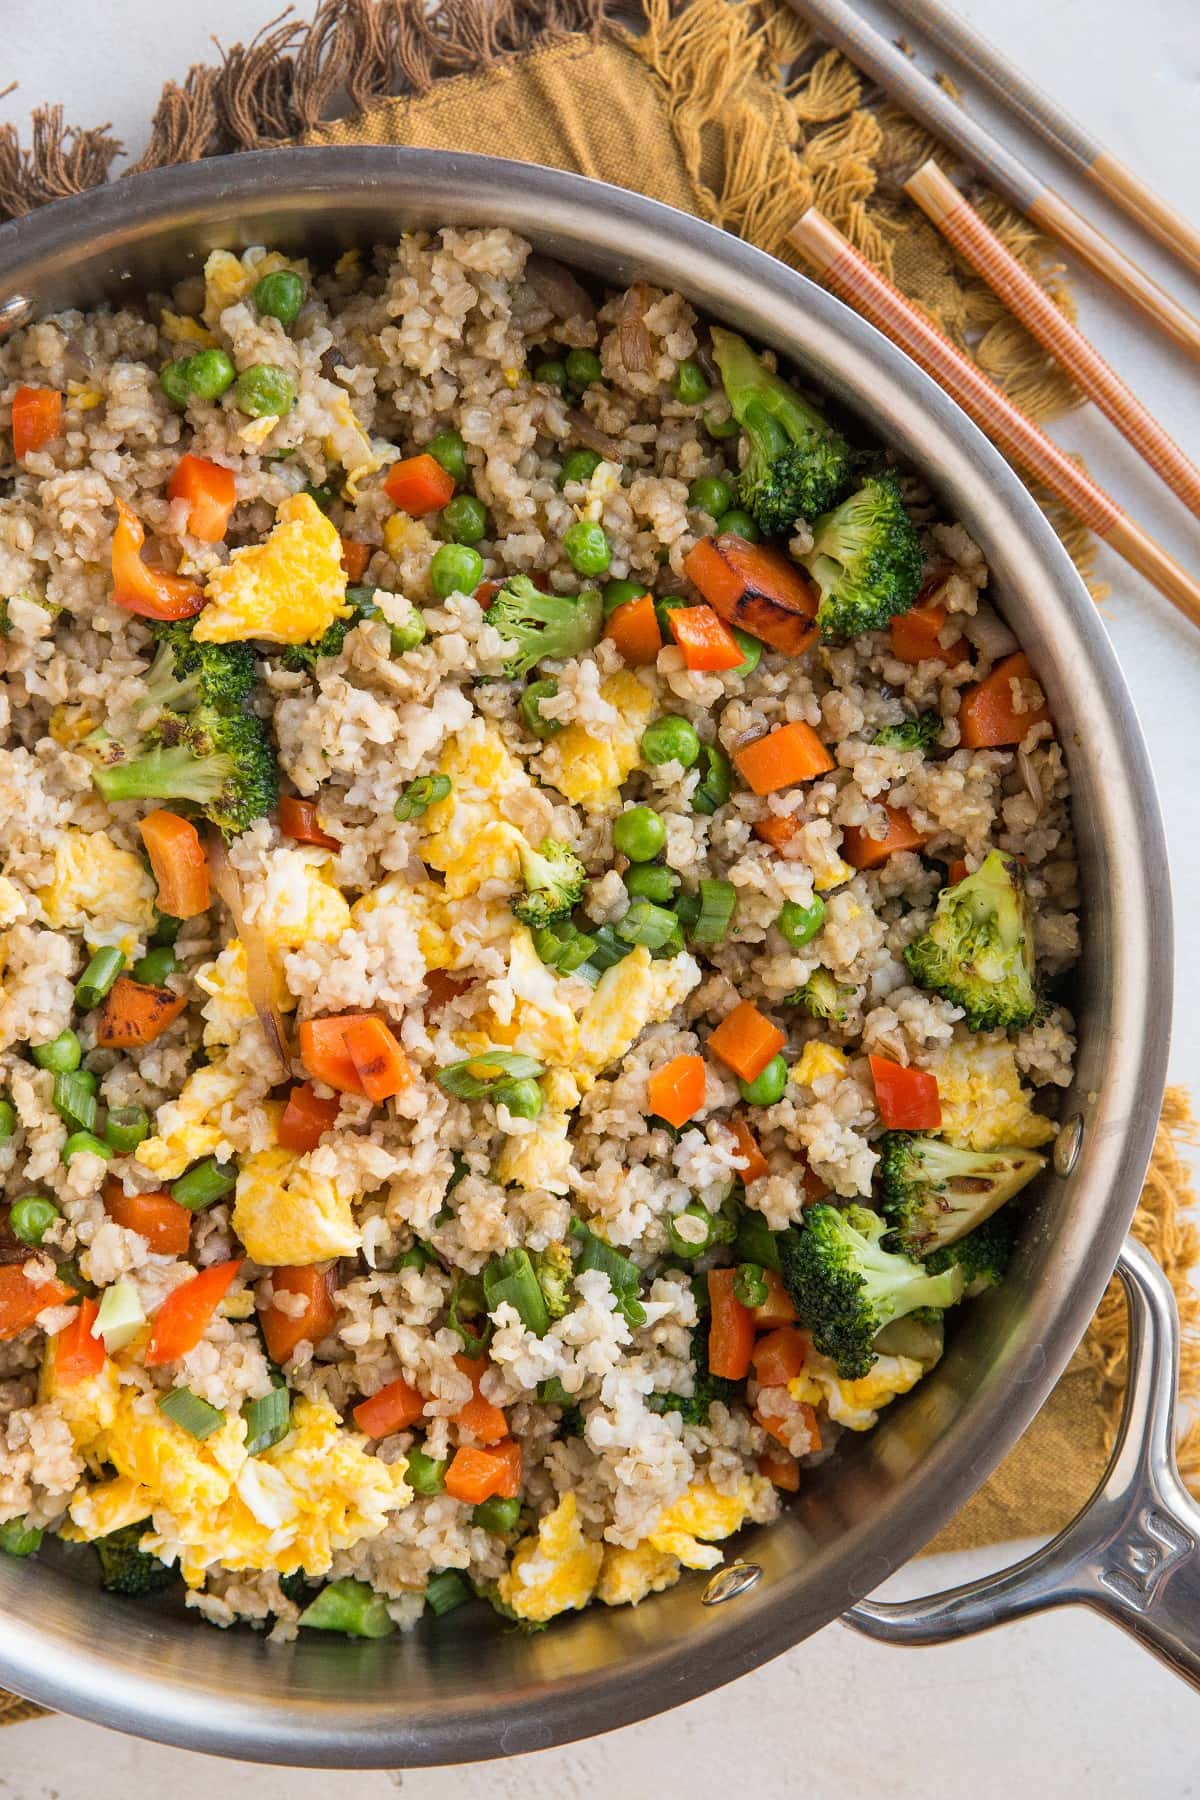 Easy Healthy Vegetable Fried Rice with brown rice, carrots, peas, bell pepper, and more